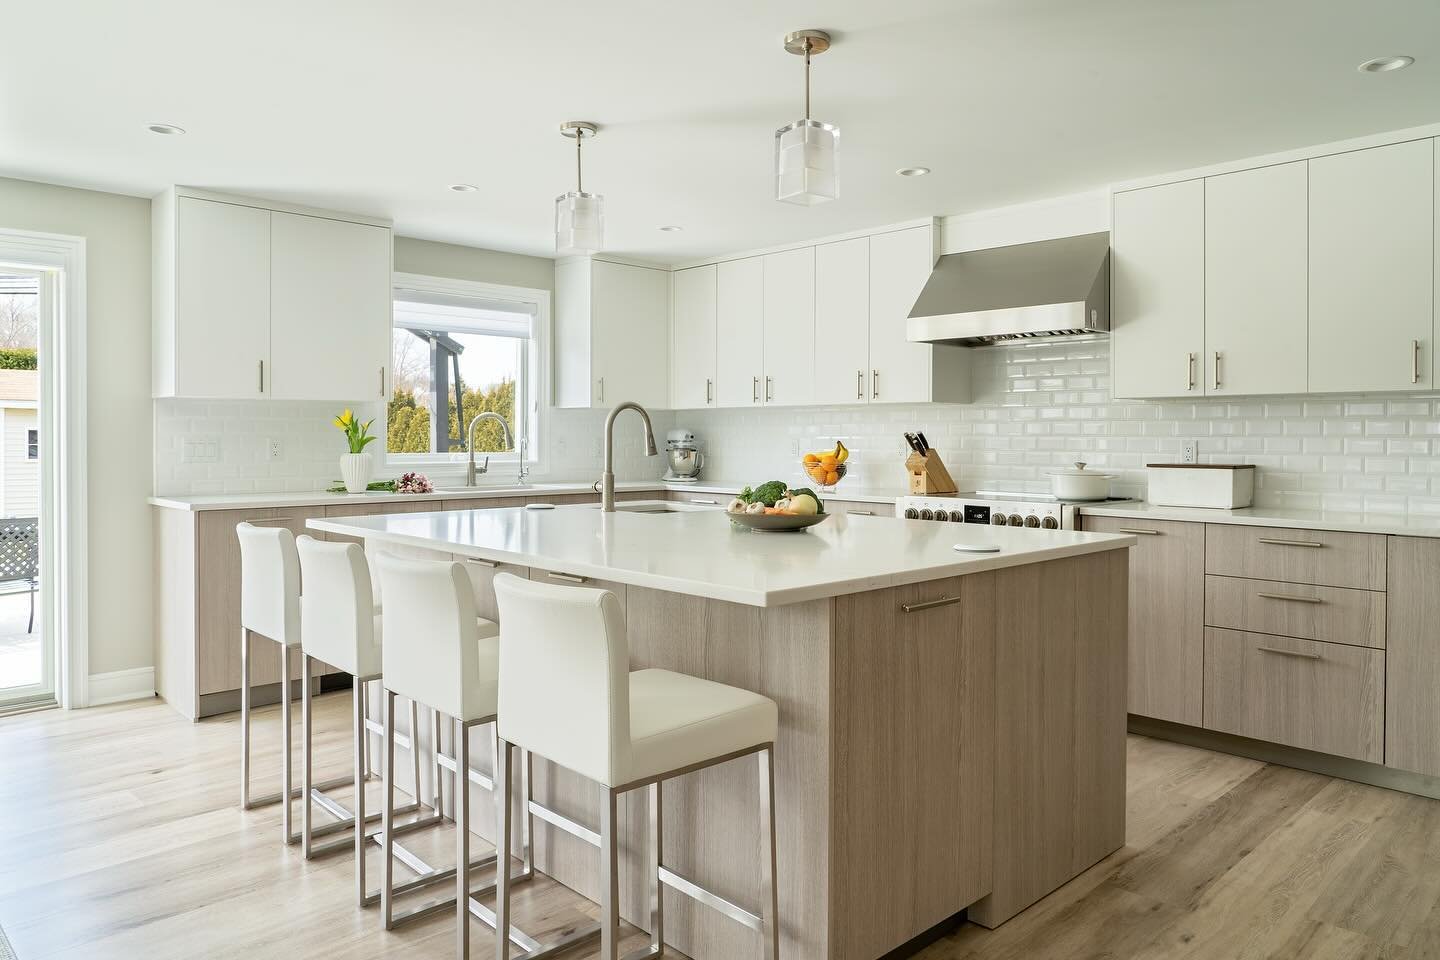 This kitchen has all the ingredients to host the perfect get-together. It has plenty of space, a neutral color palette with natural materials, gorgeous garden views, and a layout ideal for socializing while the chef of the family prepares delicious d